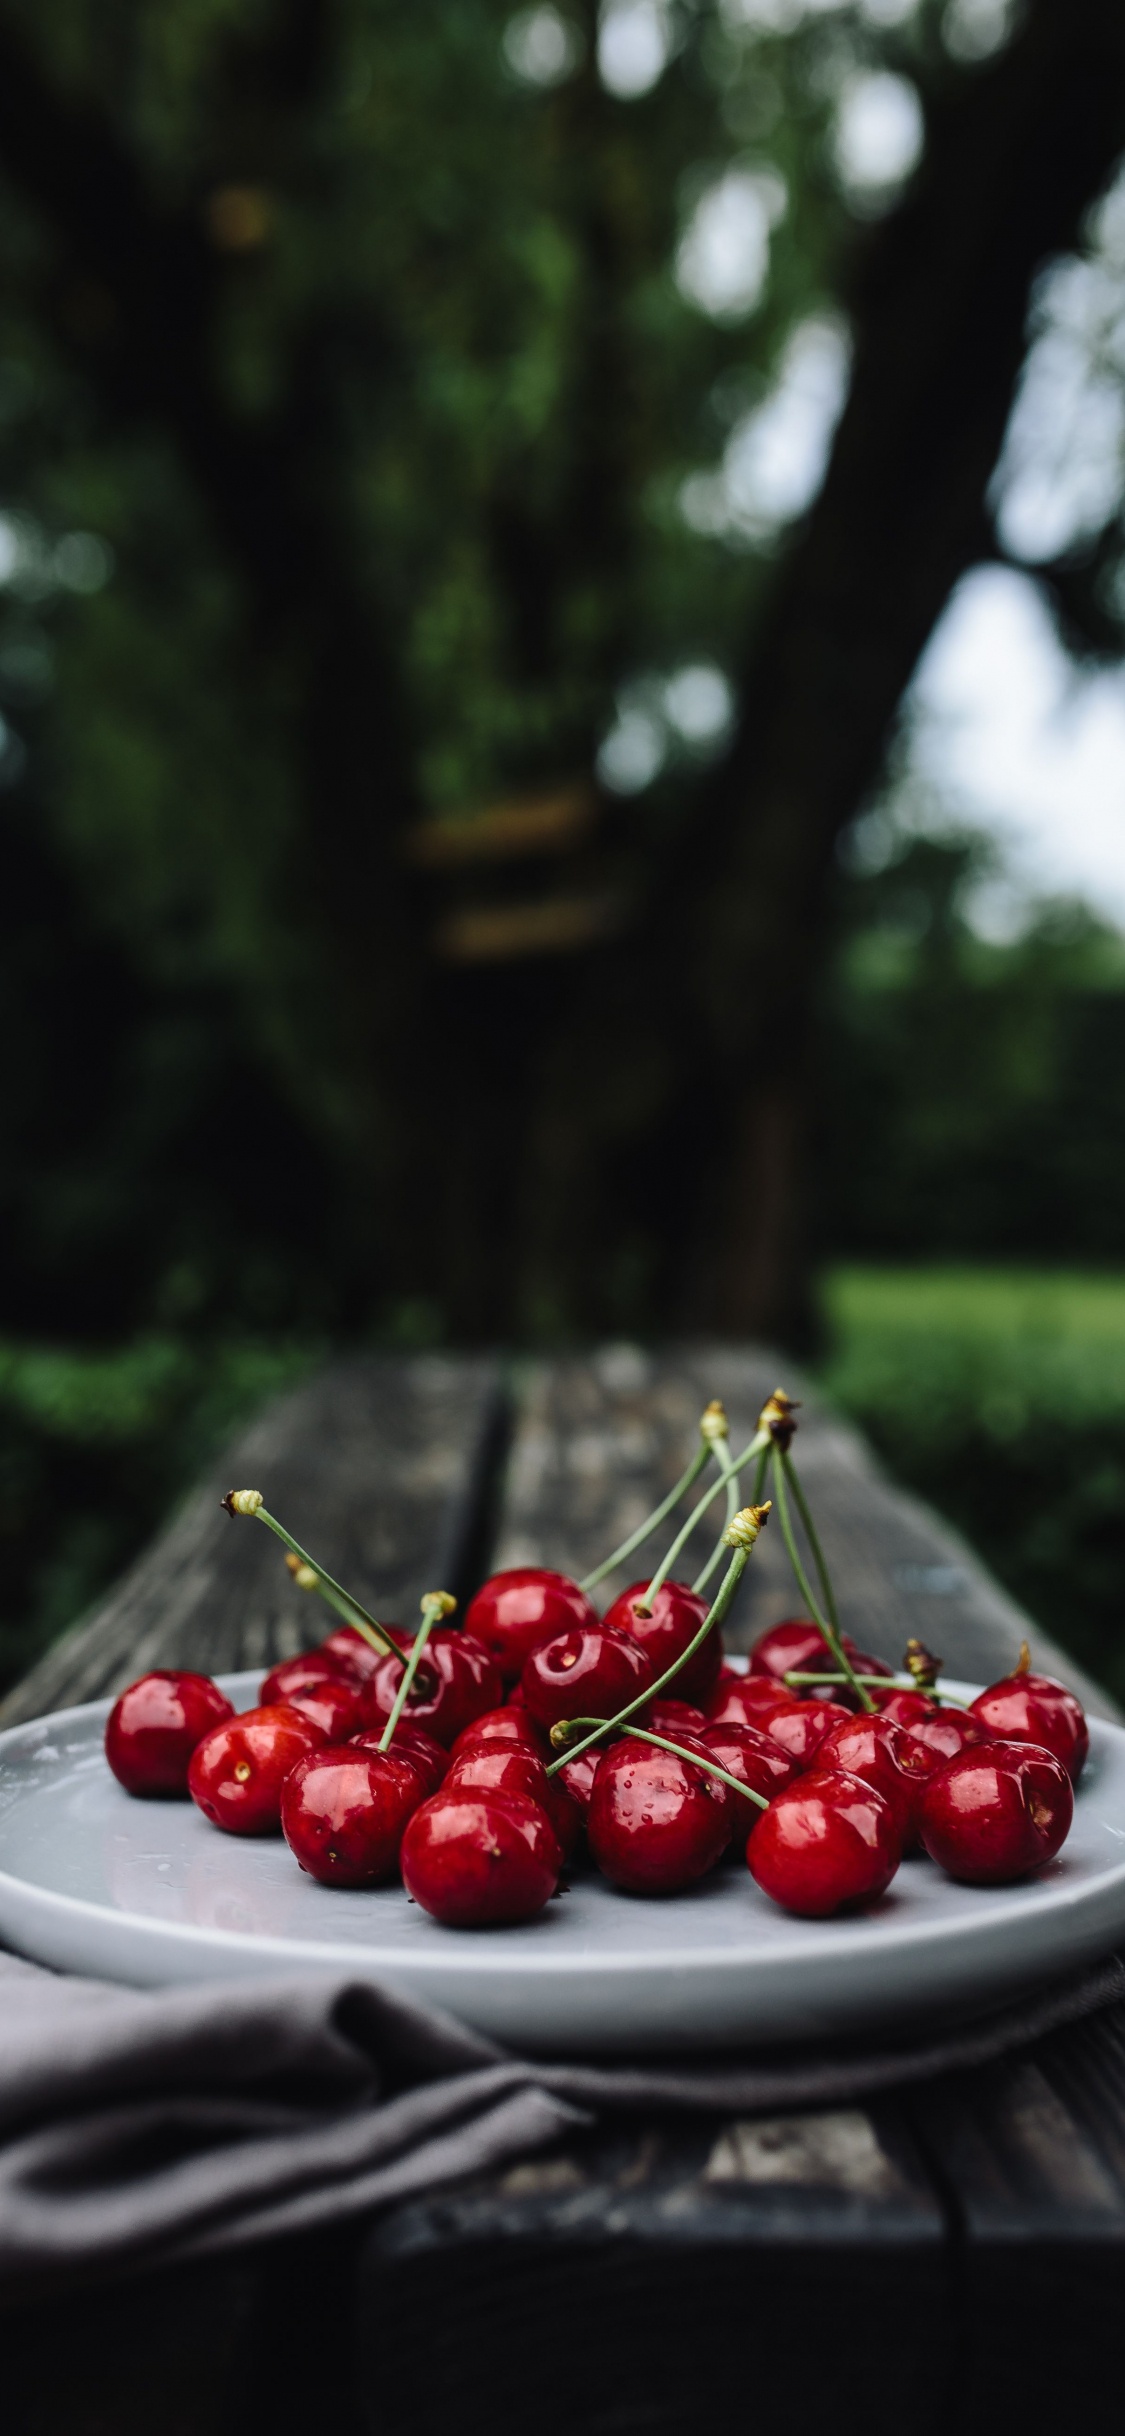 Red Cherries on White Ceramic Plate. Wallpaper in 1125x2436 Resolution